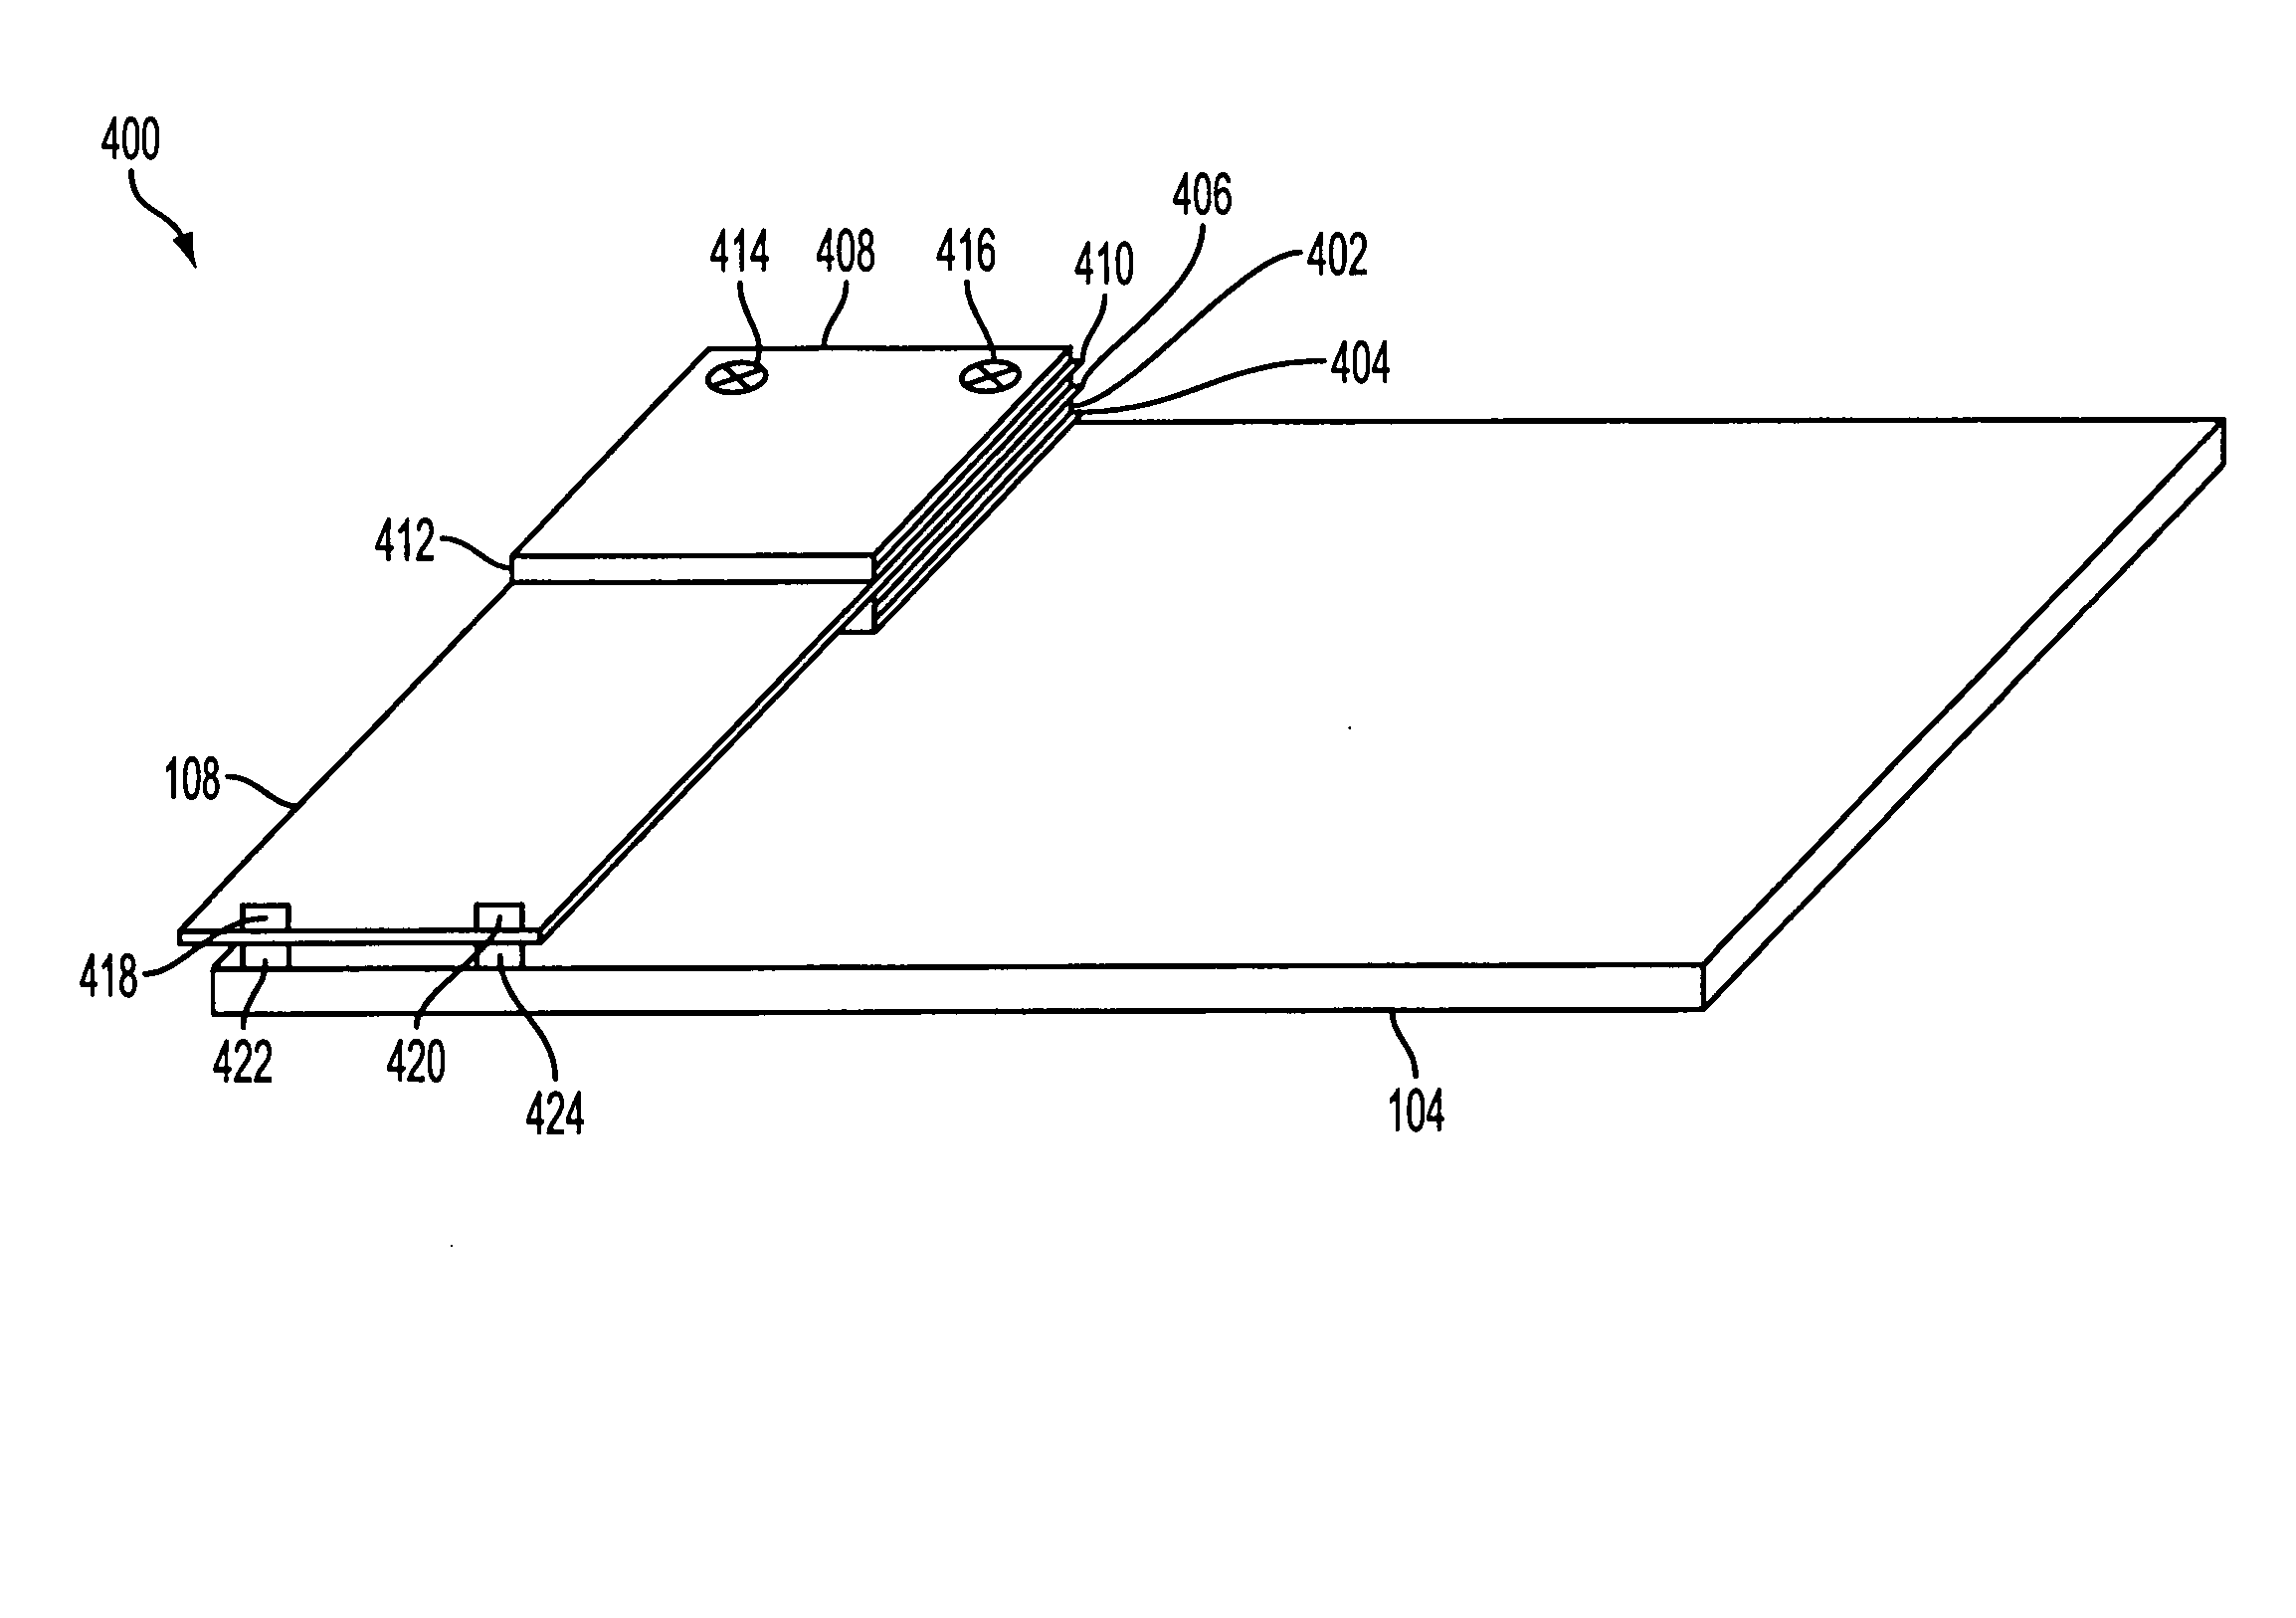 System and method for Advanced Mezzanine Card connection